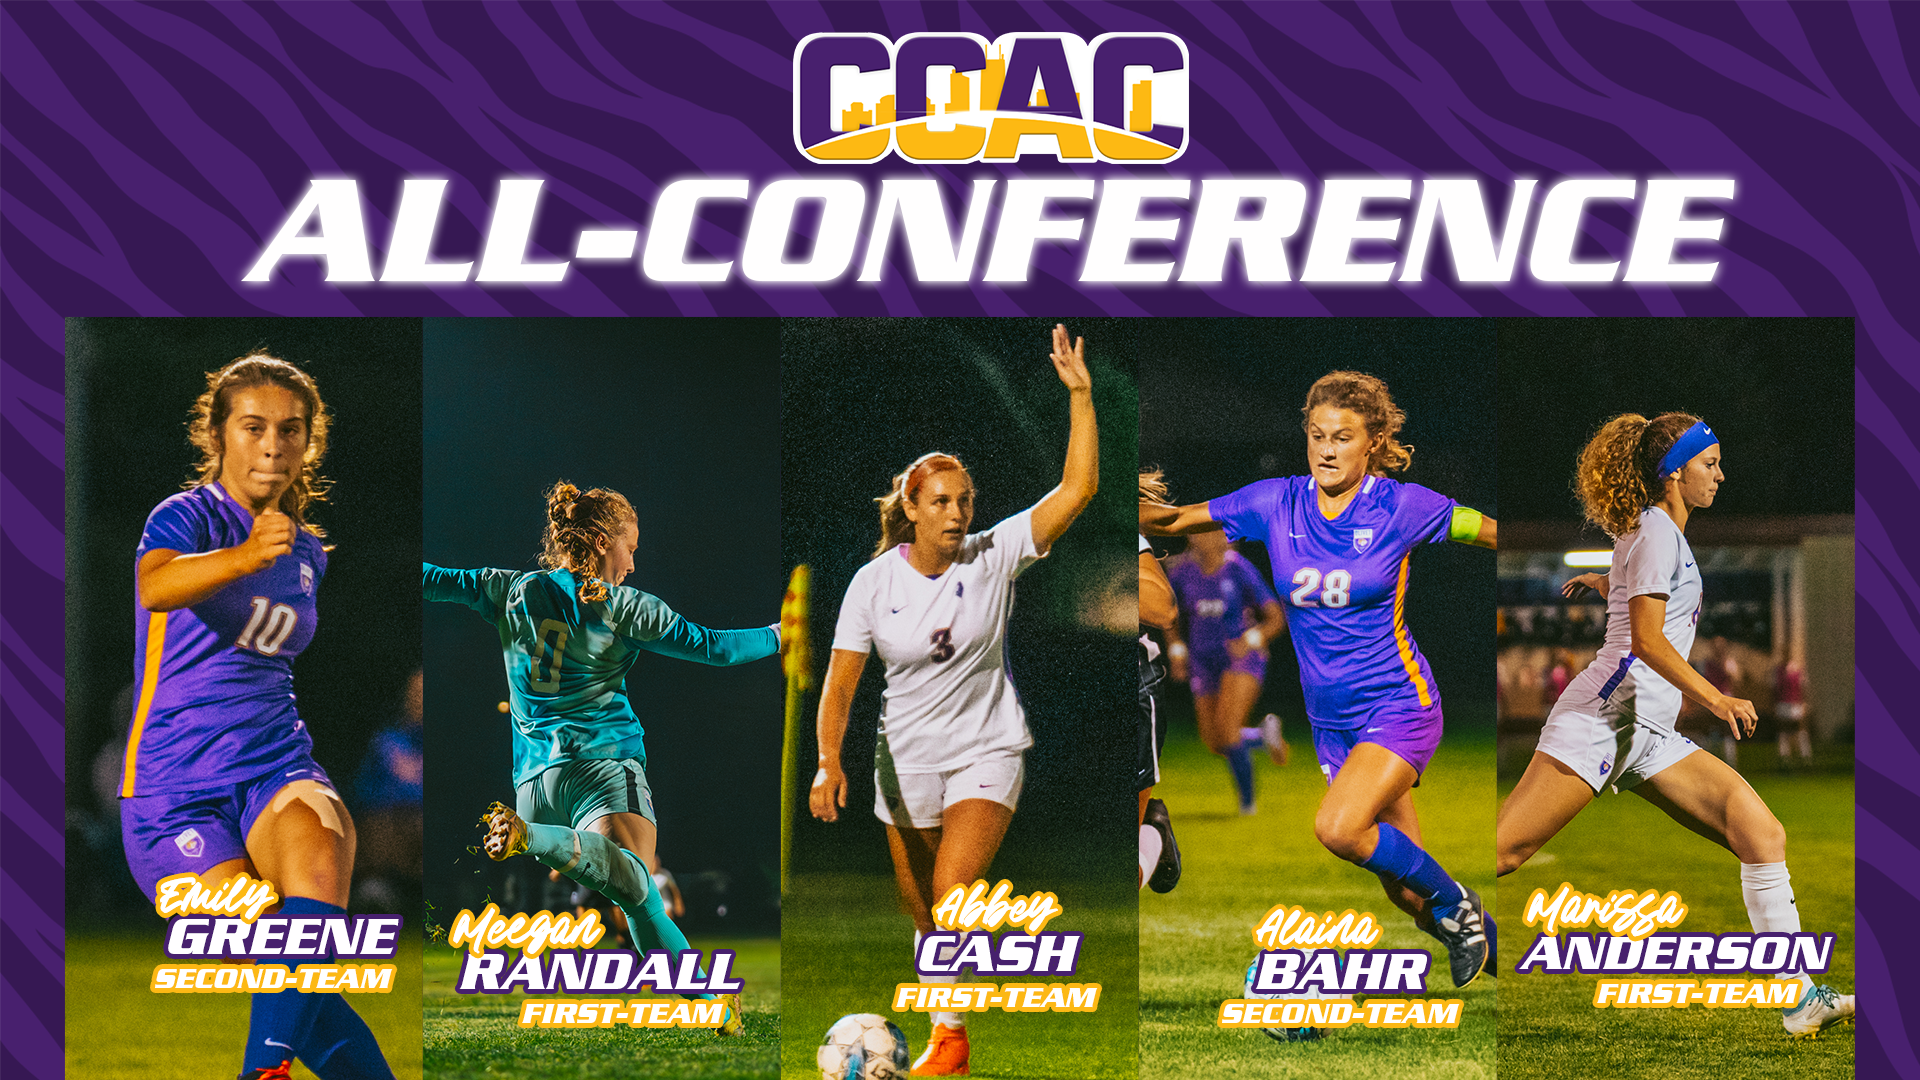 FIVE TIGERS EARN ALL-CONFERENCE RECOGNITION